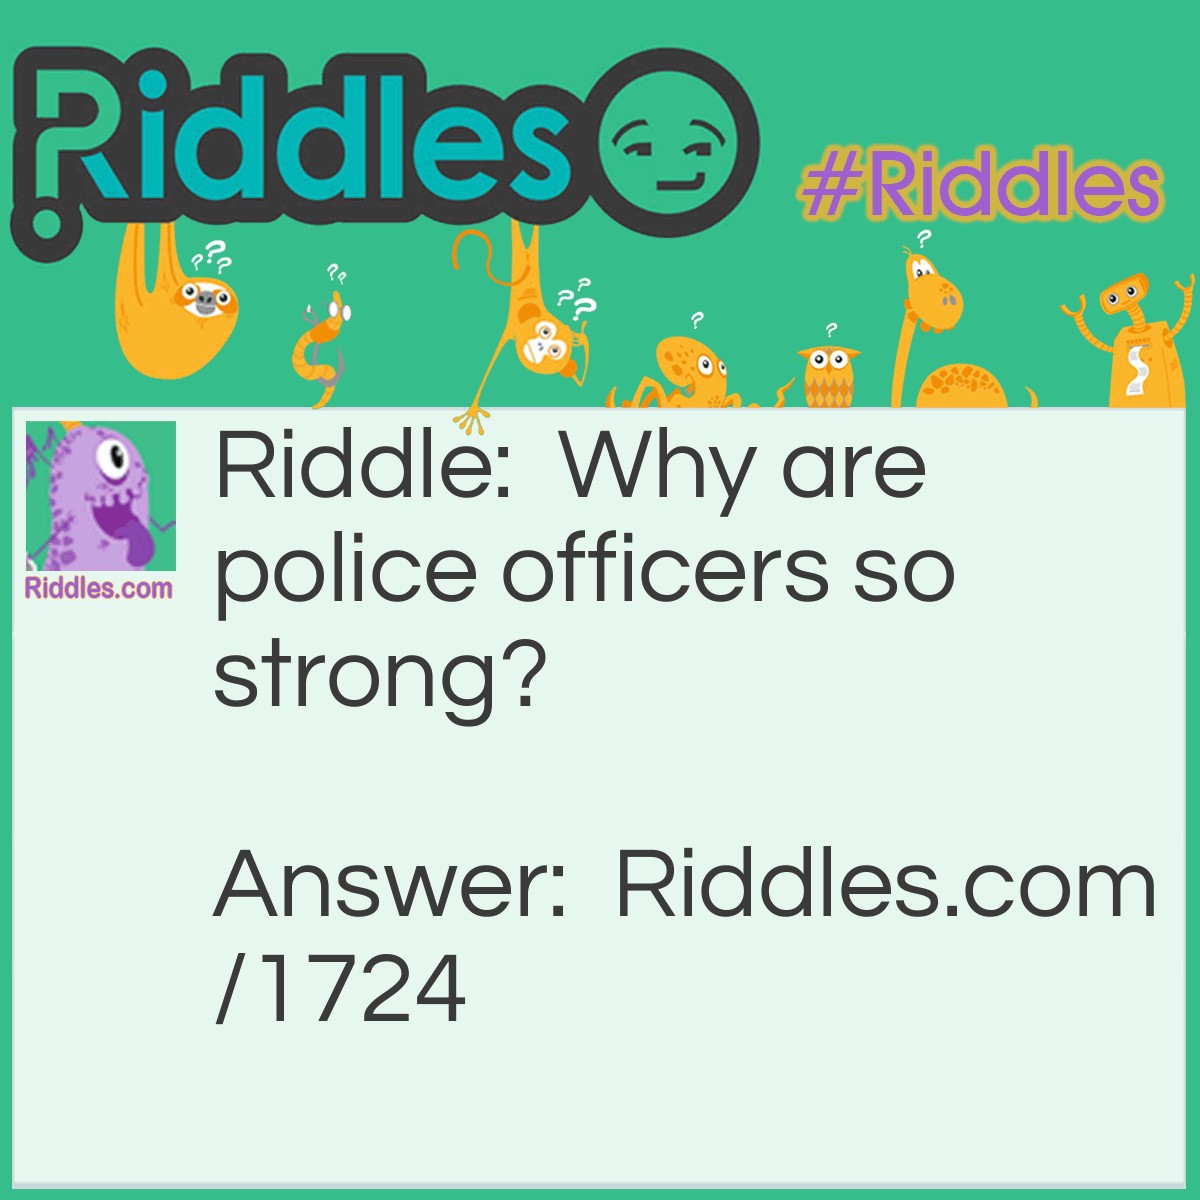 Riddle: Why are police officers so strong? Answer: Because they can hold up traffic.